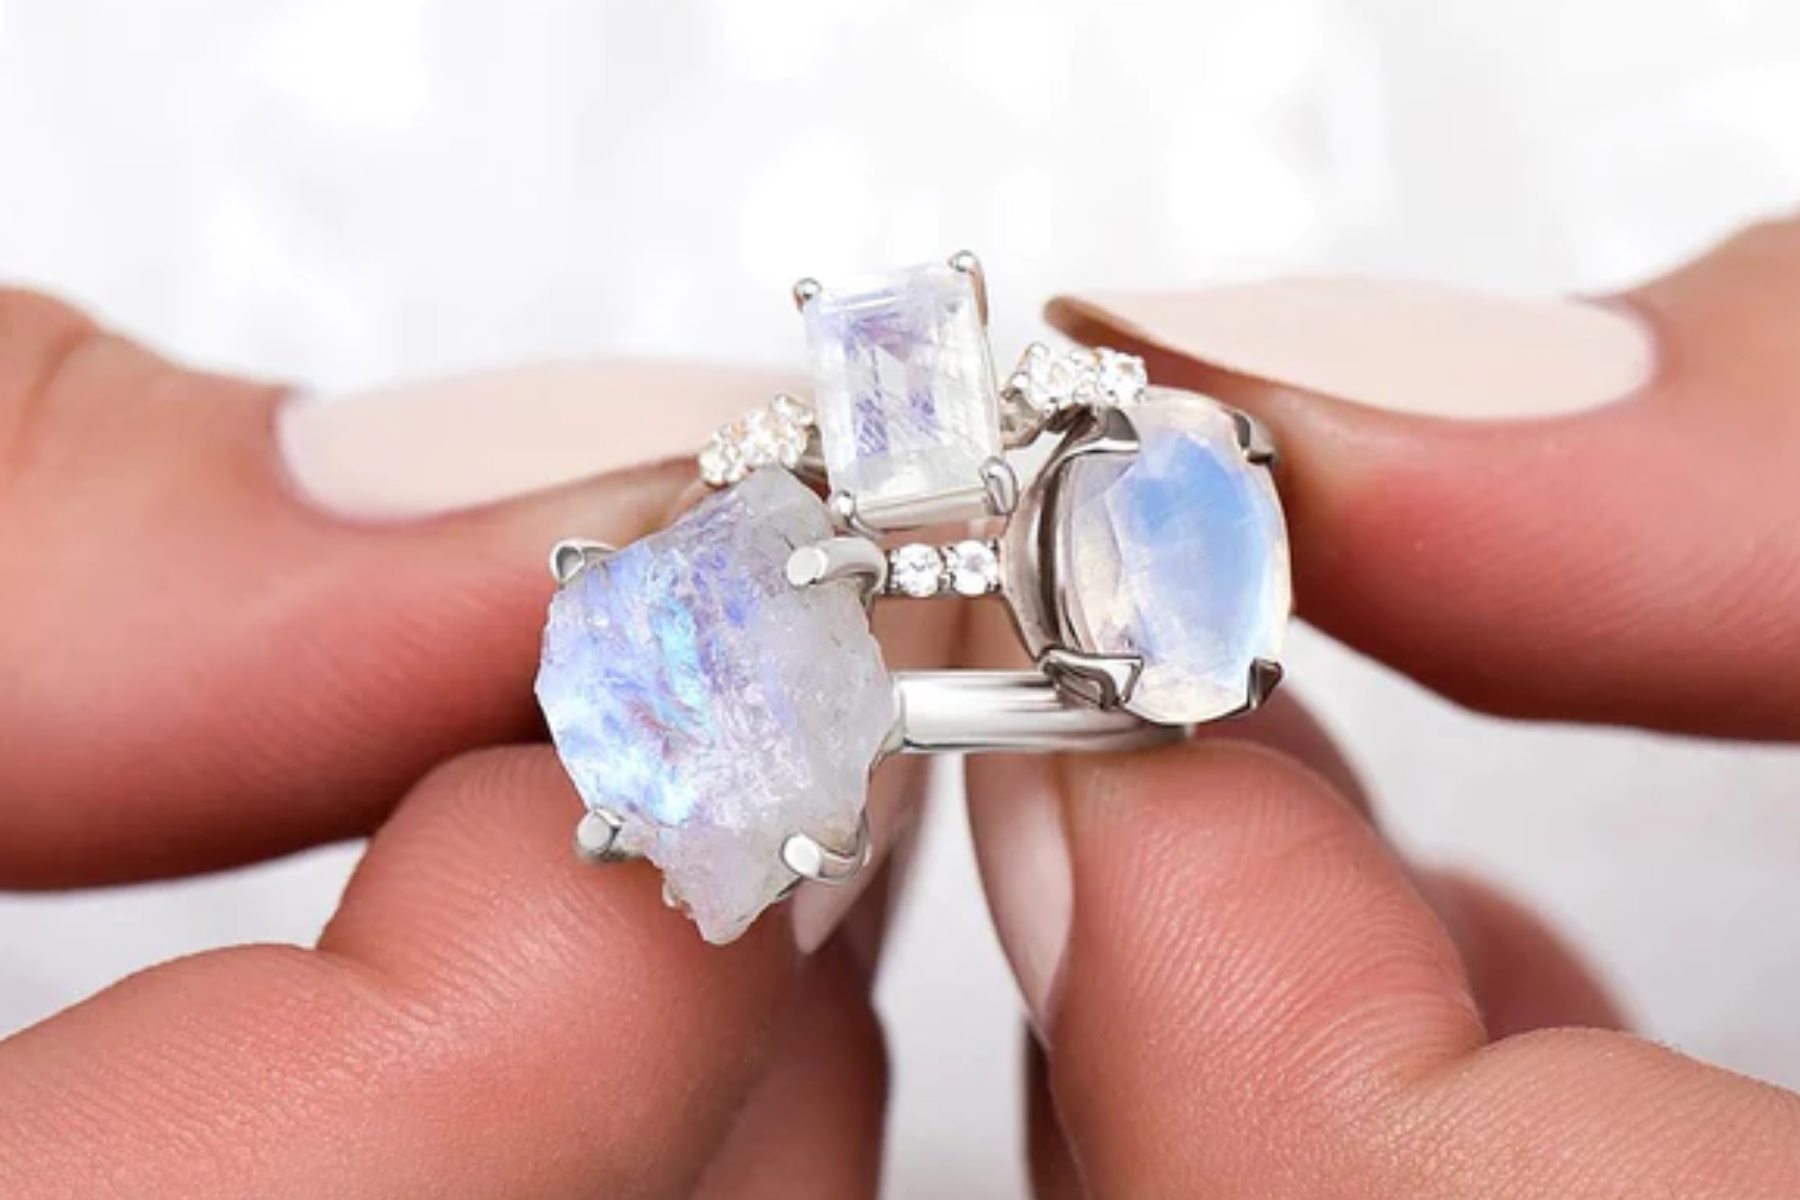 Moonstone rings of varying sizes held by a woman's finger